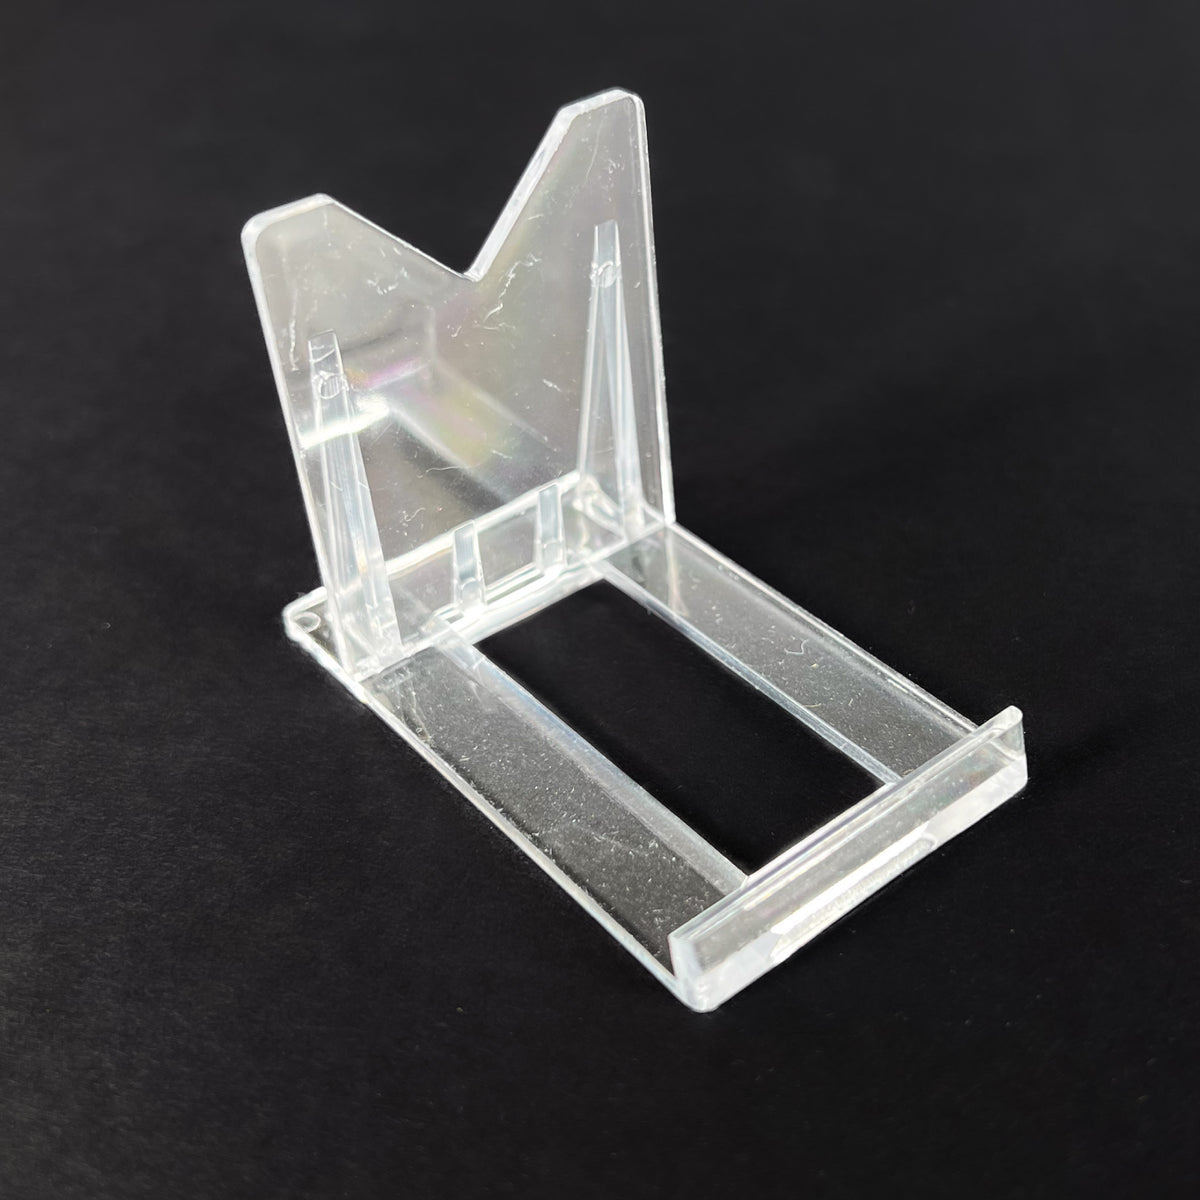 Adjustable 2 part Clear Acrylic Display Stand for Minerals or Fossils